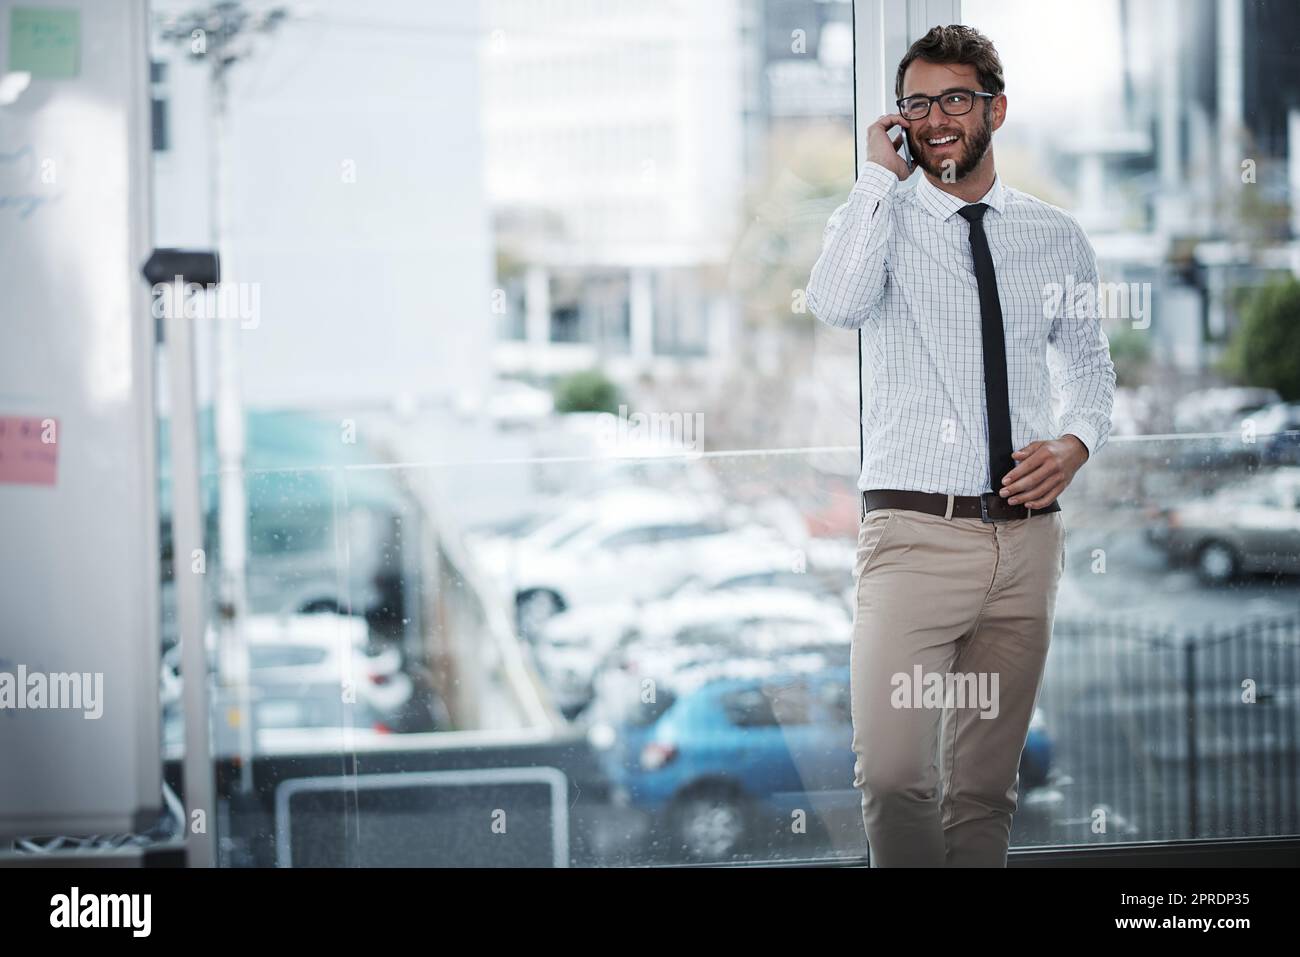 Success lies in your confidence to chase after it. a young businessman talking on a cellphone in an office. Stock Photo